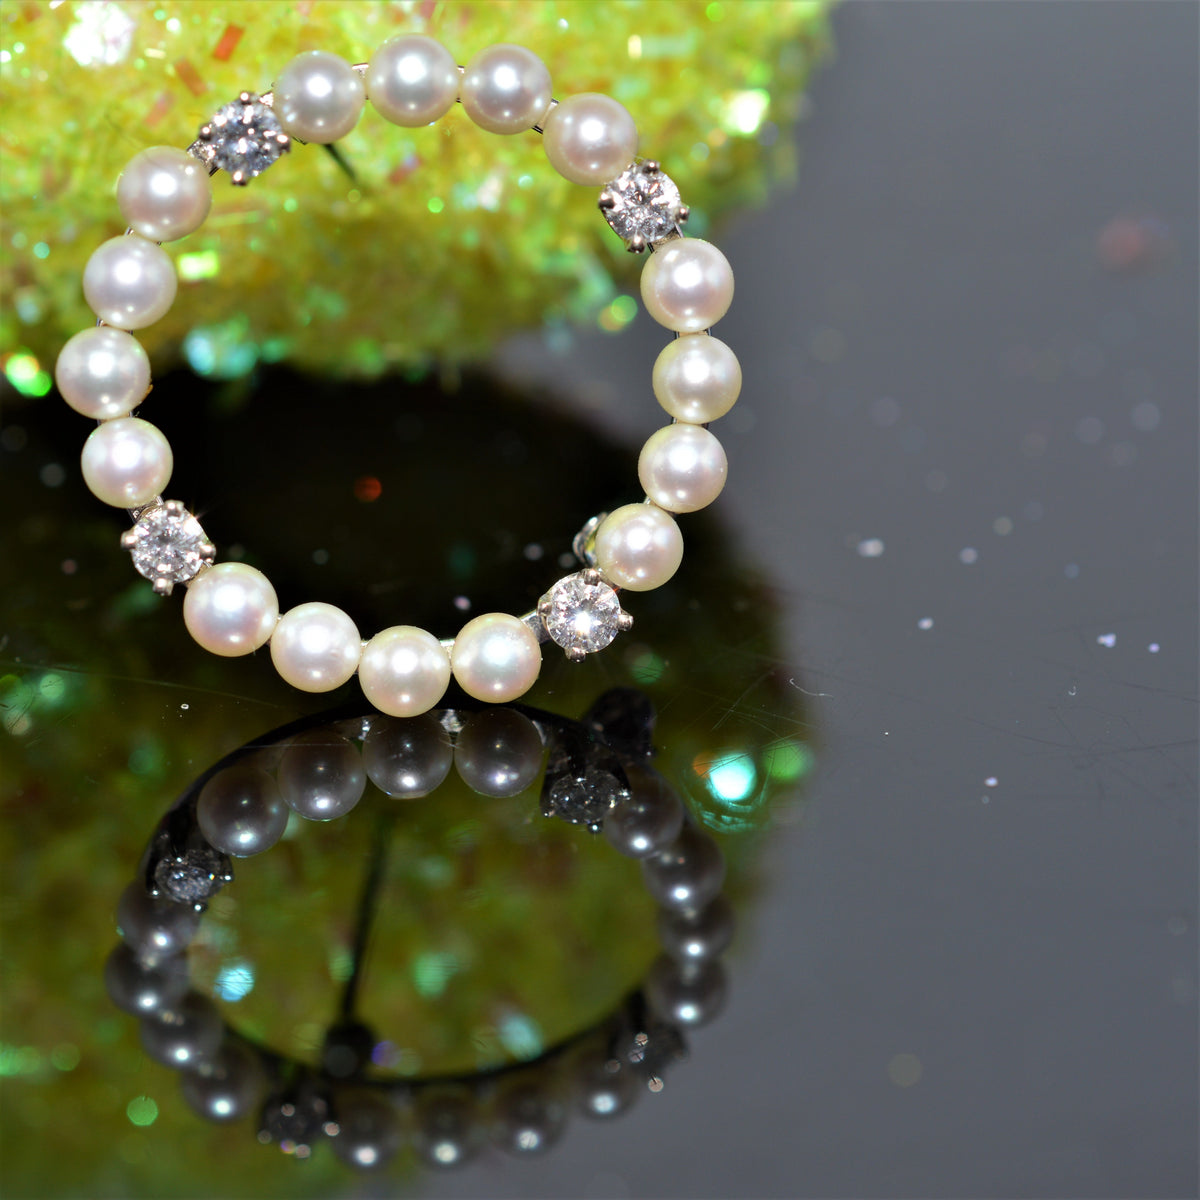 10K White Gold Circle Brooch With Pearls and Diamonds